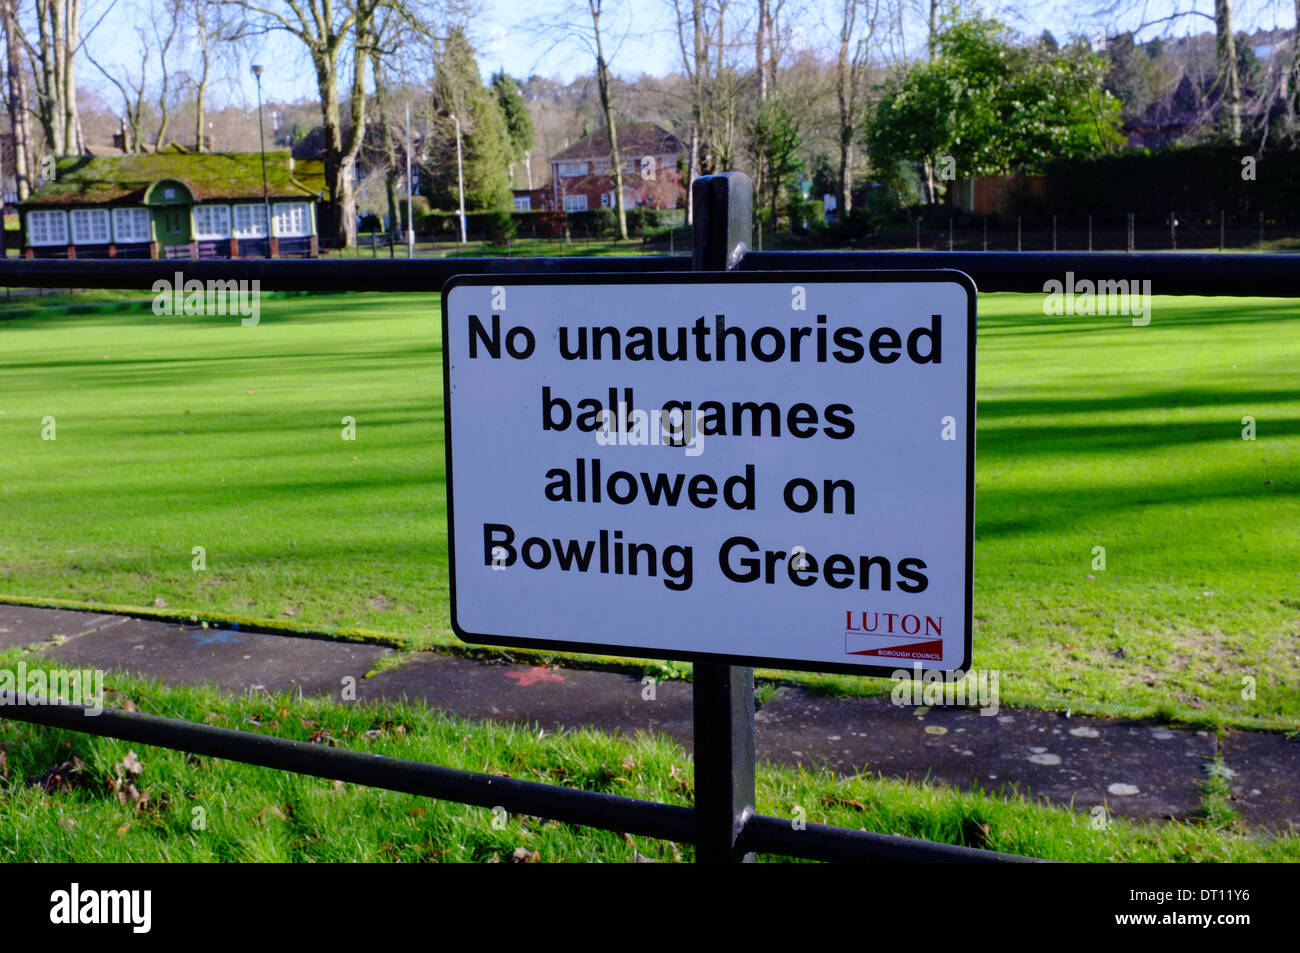 Bowling green in Wardown Park, Luton warning against unauthorized ball games Stock Photo